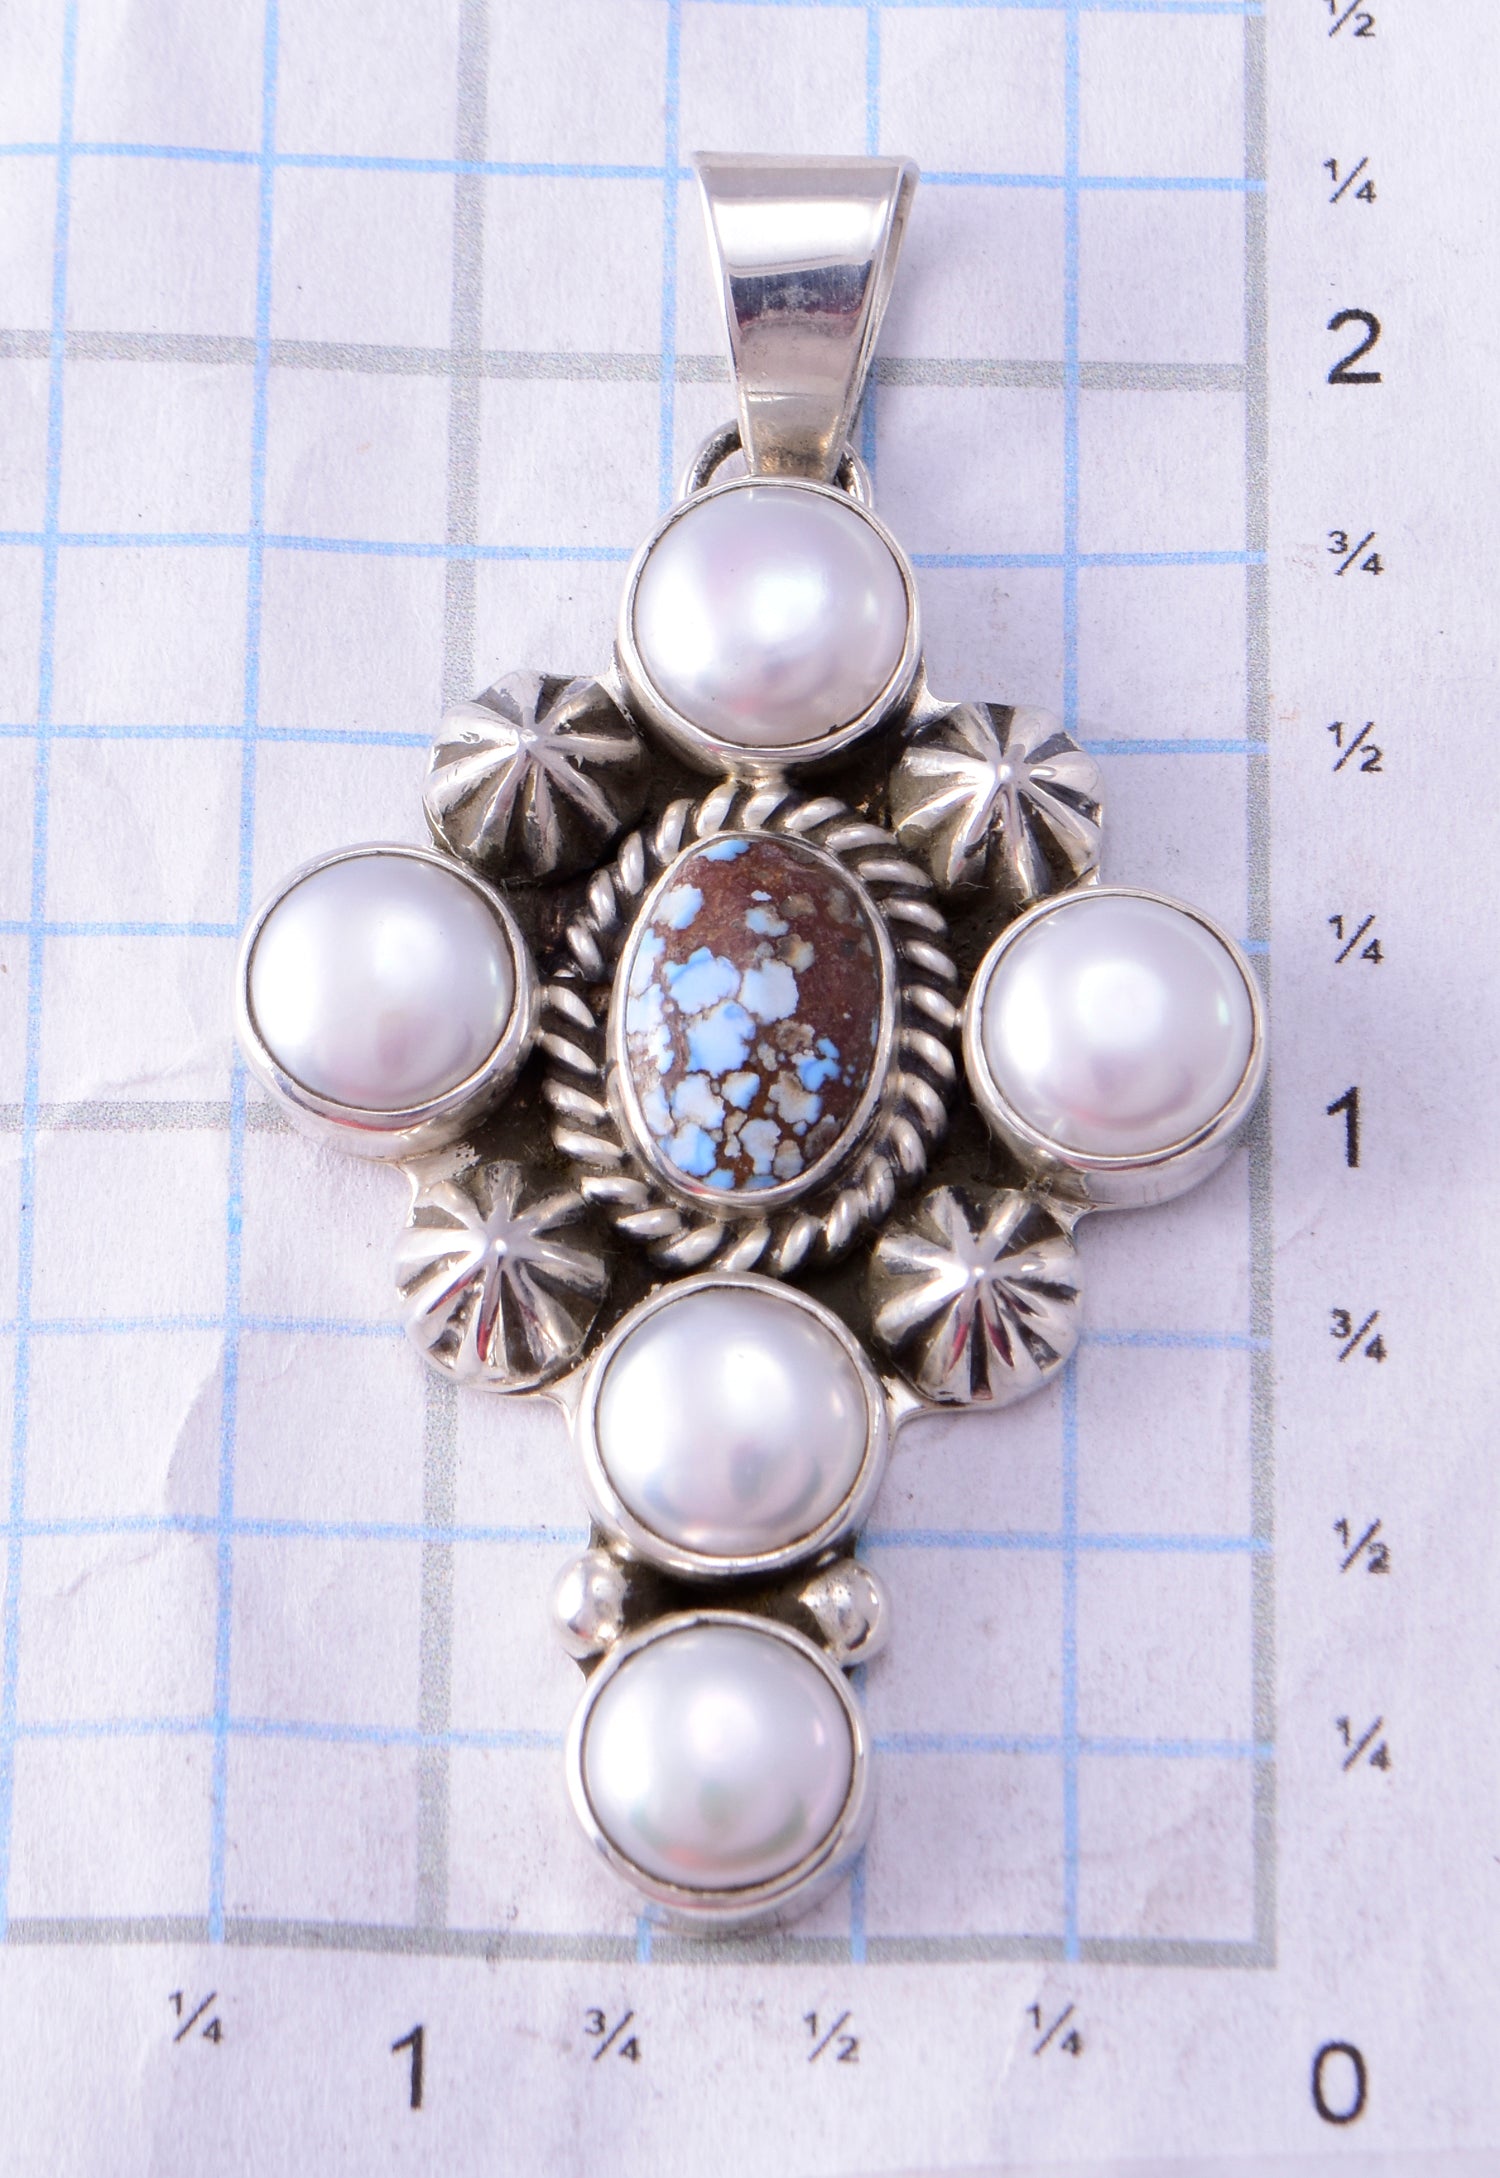 Silver & Golden Hills Turquoise - Freshwater Pearls Cross by Erick Begay 3C30Q